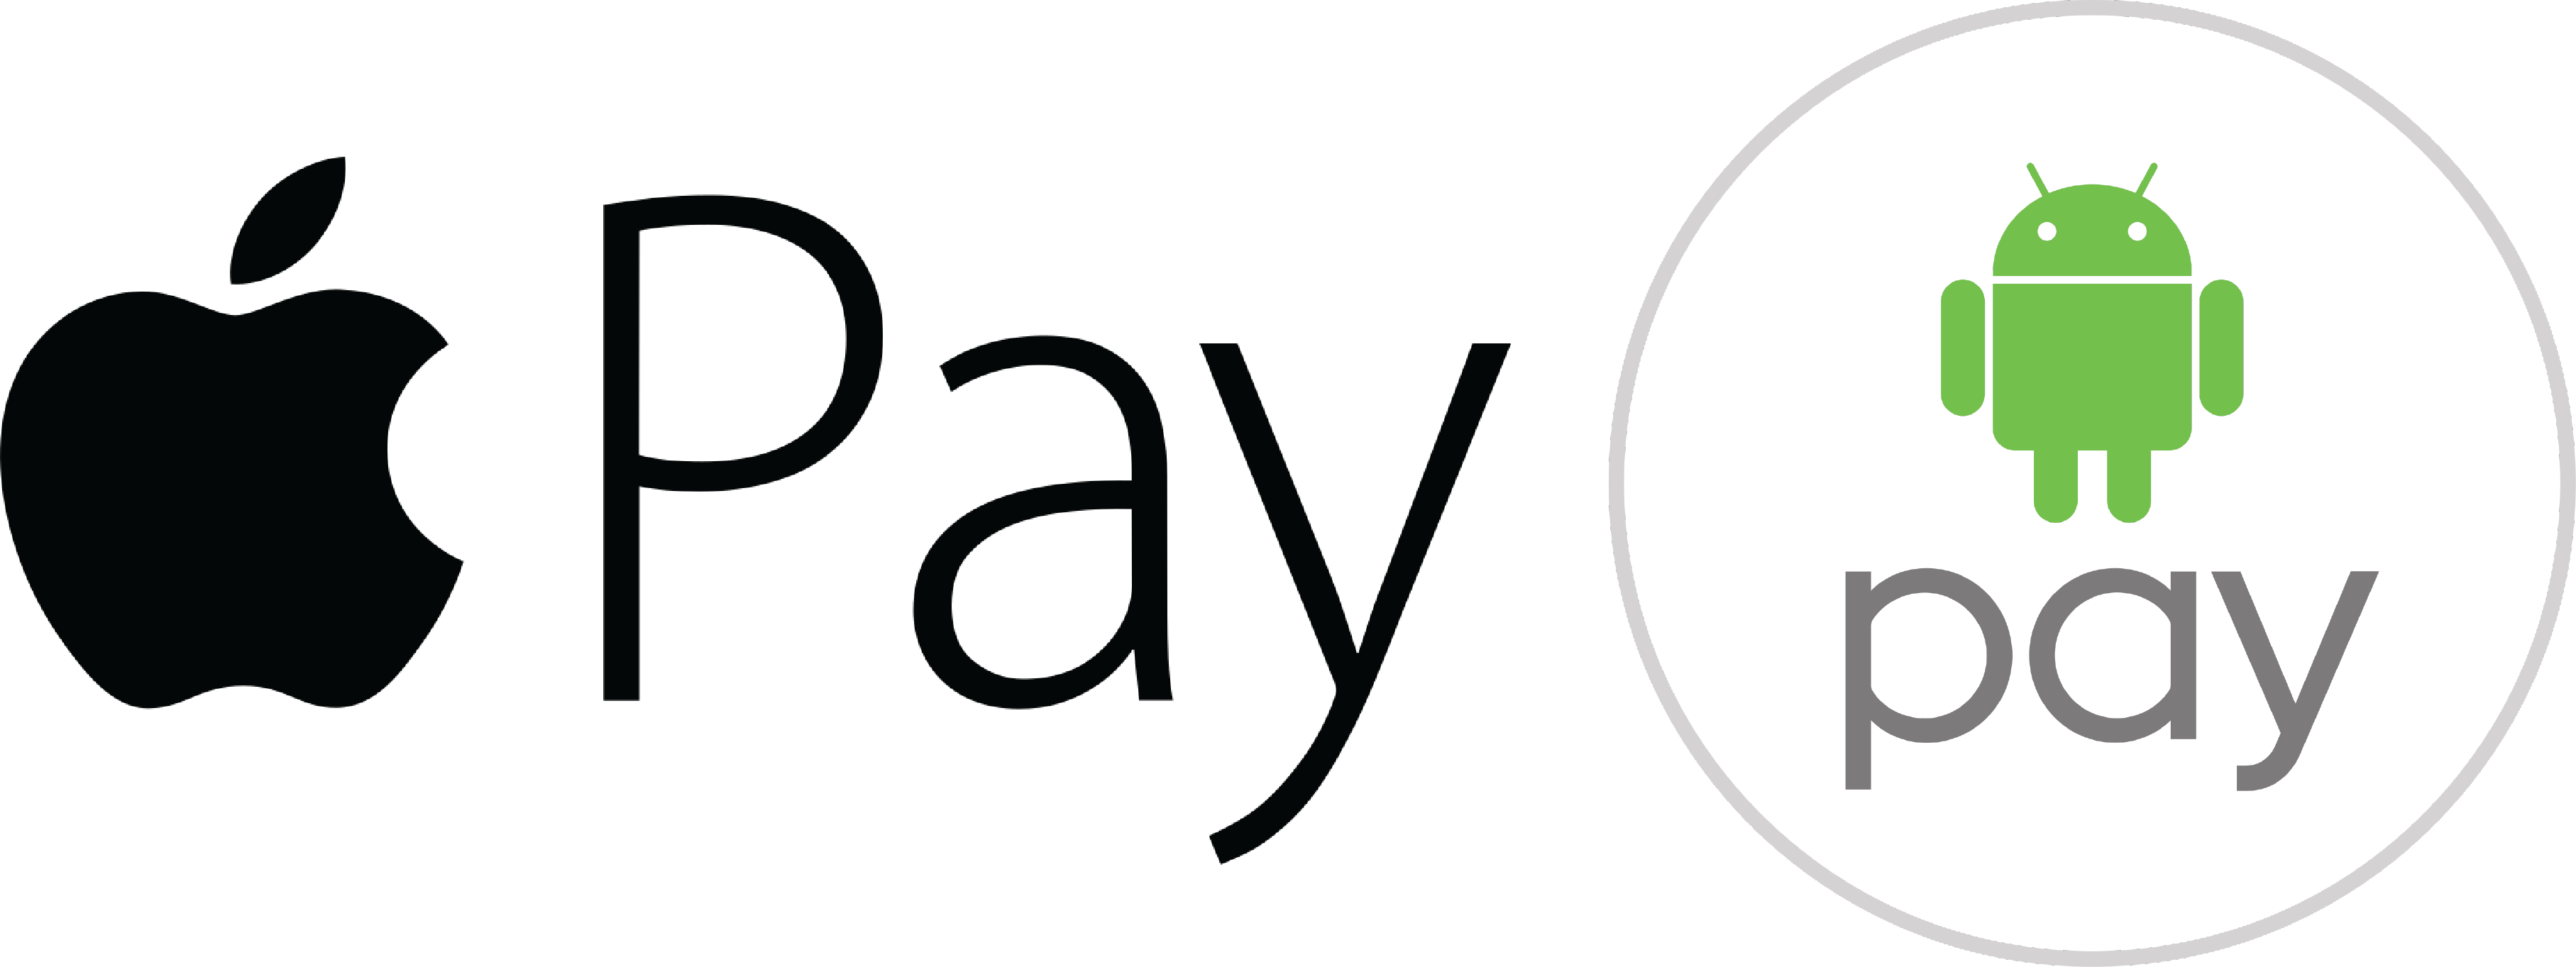 can you get apple pay on android